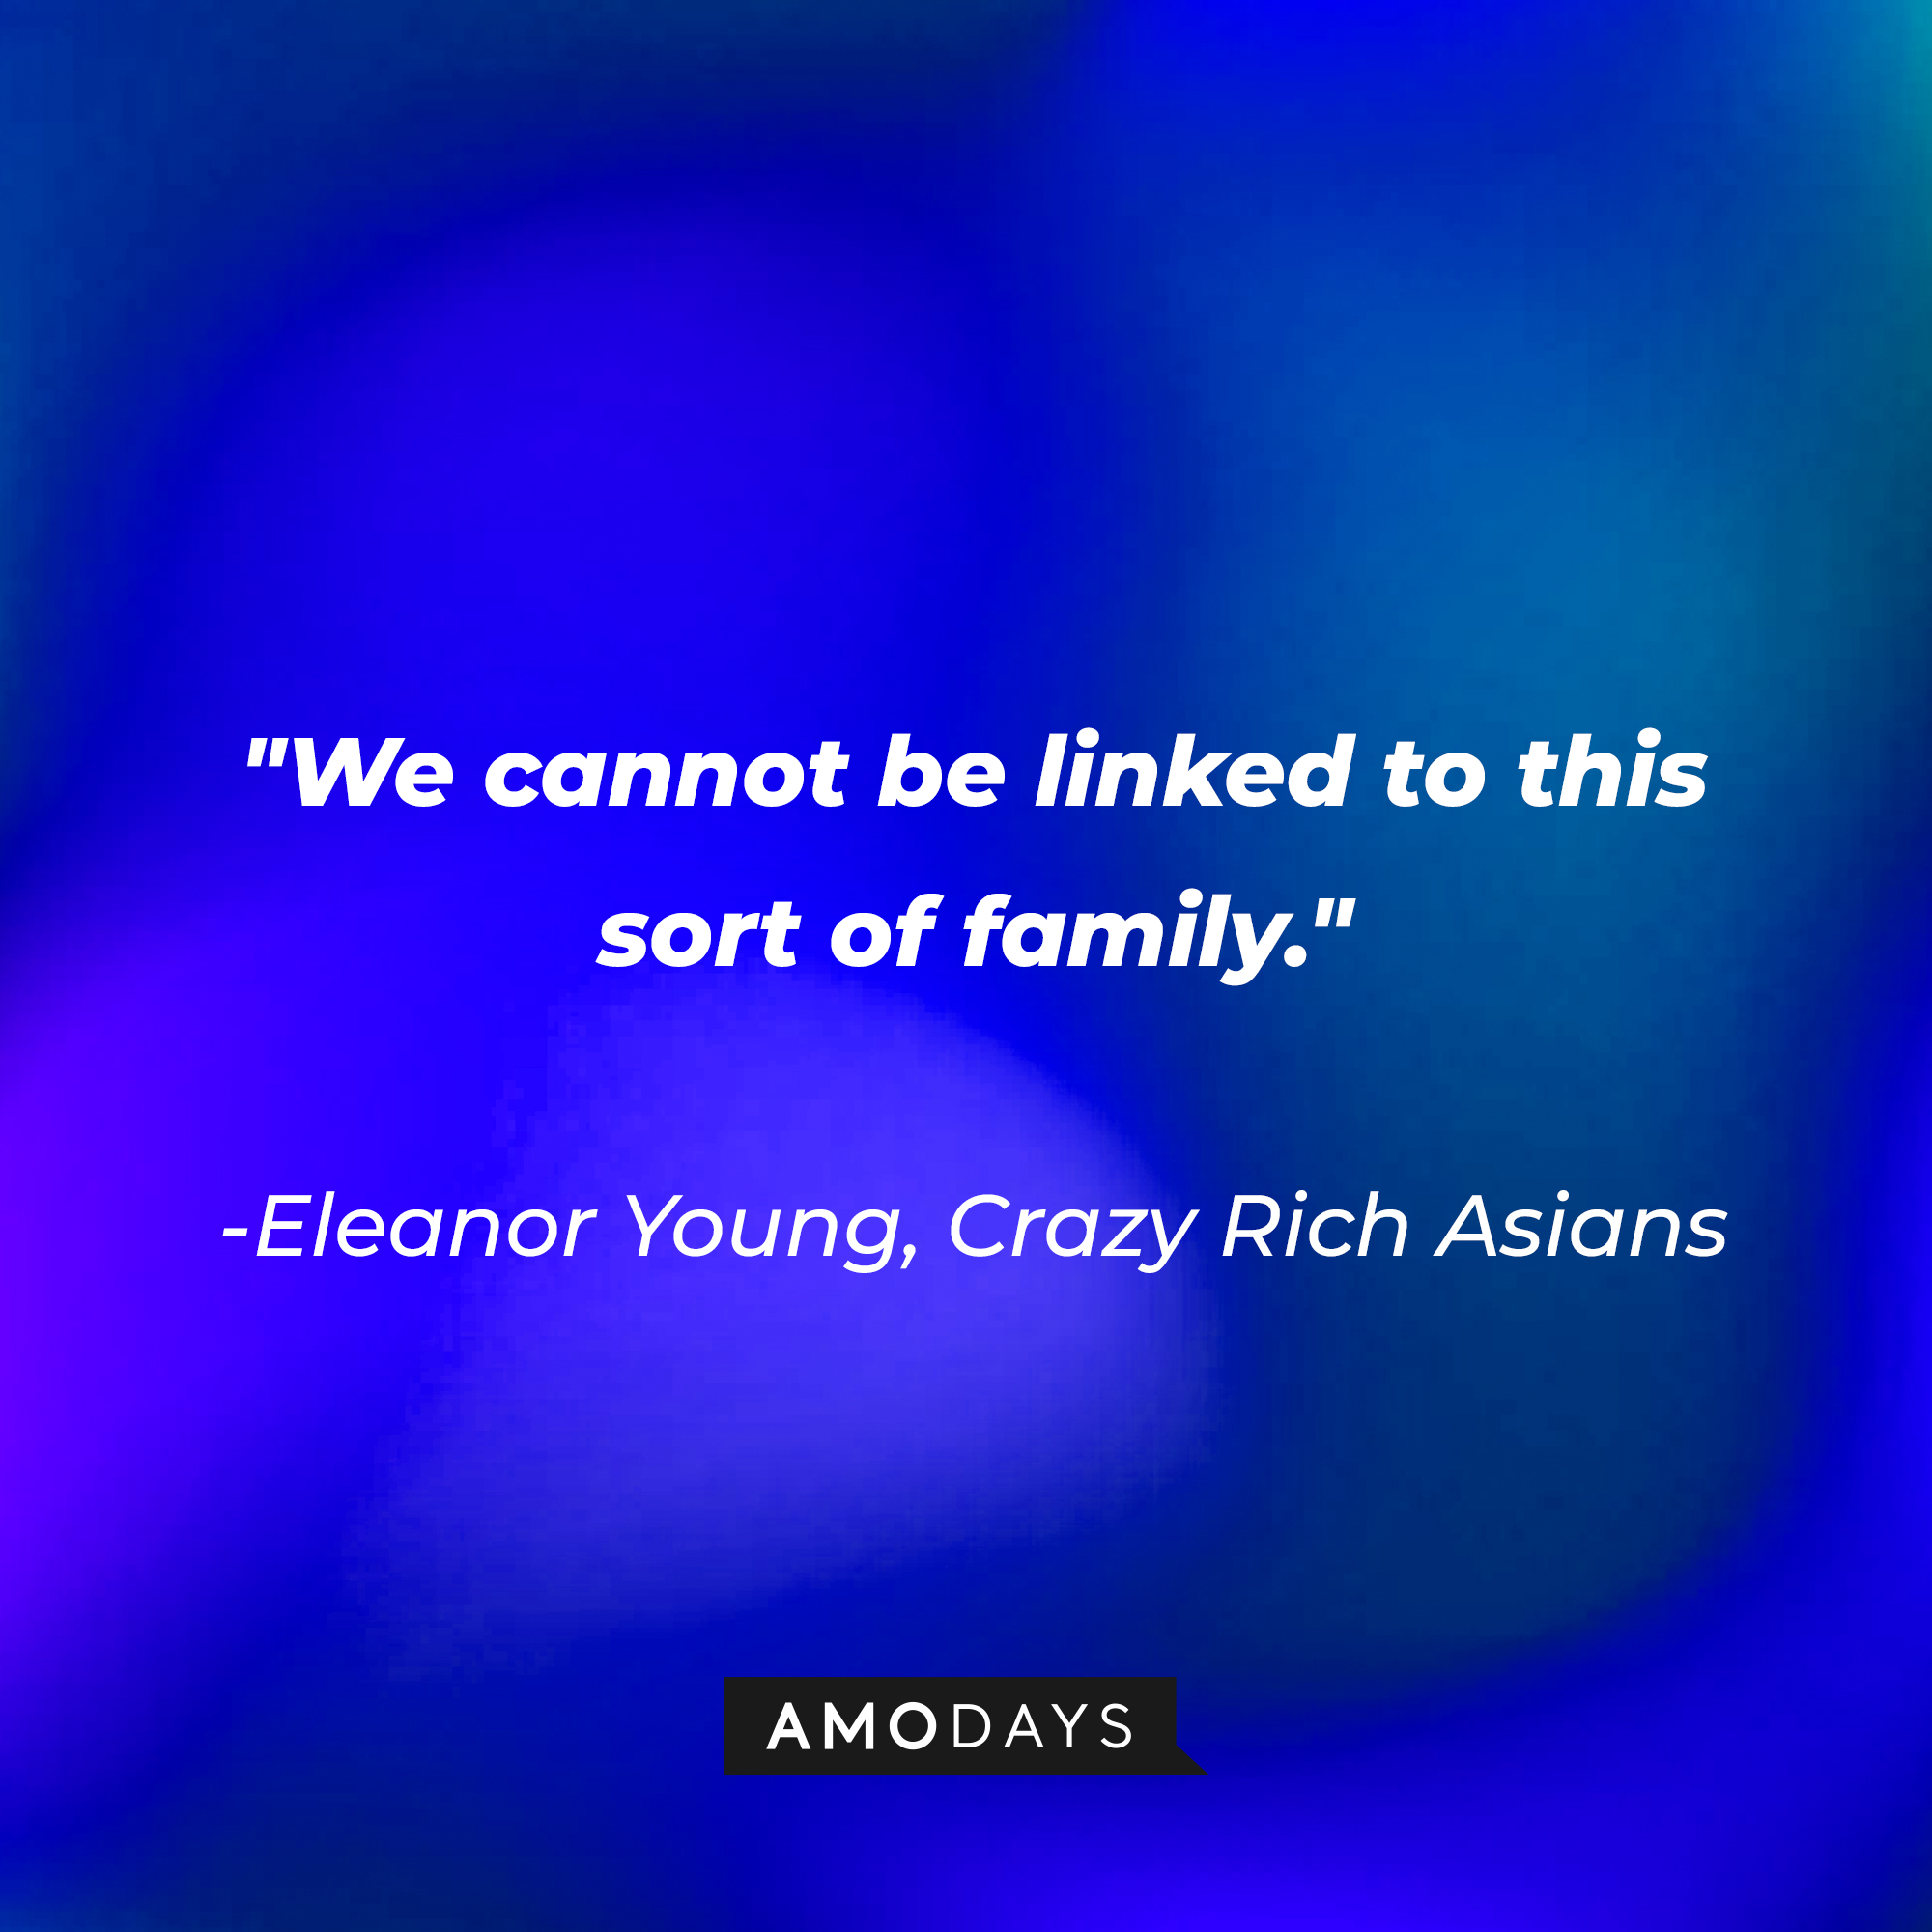 Eleanor Young's quote: "We cannot be linked to this sort of family." | Source: AmoDays